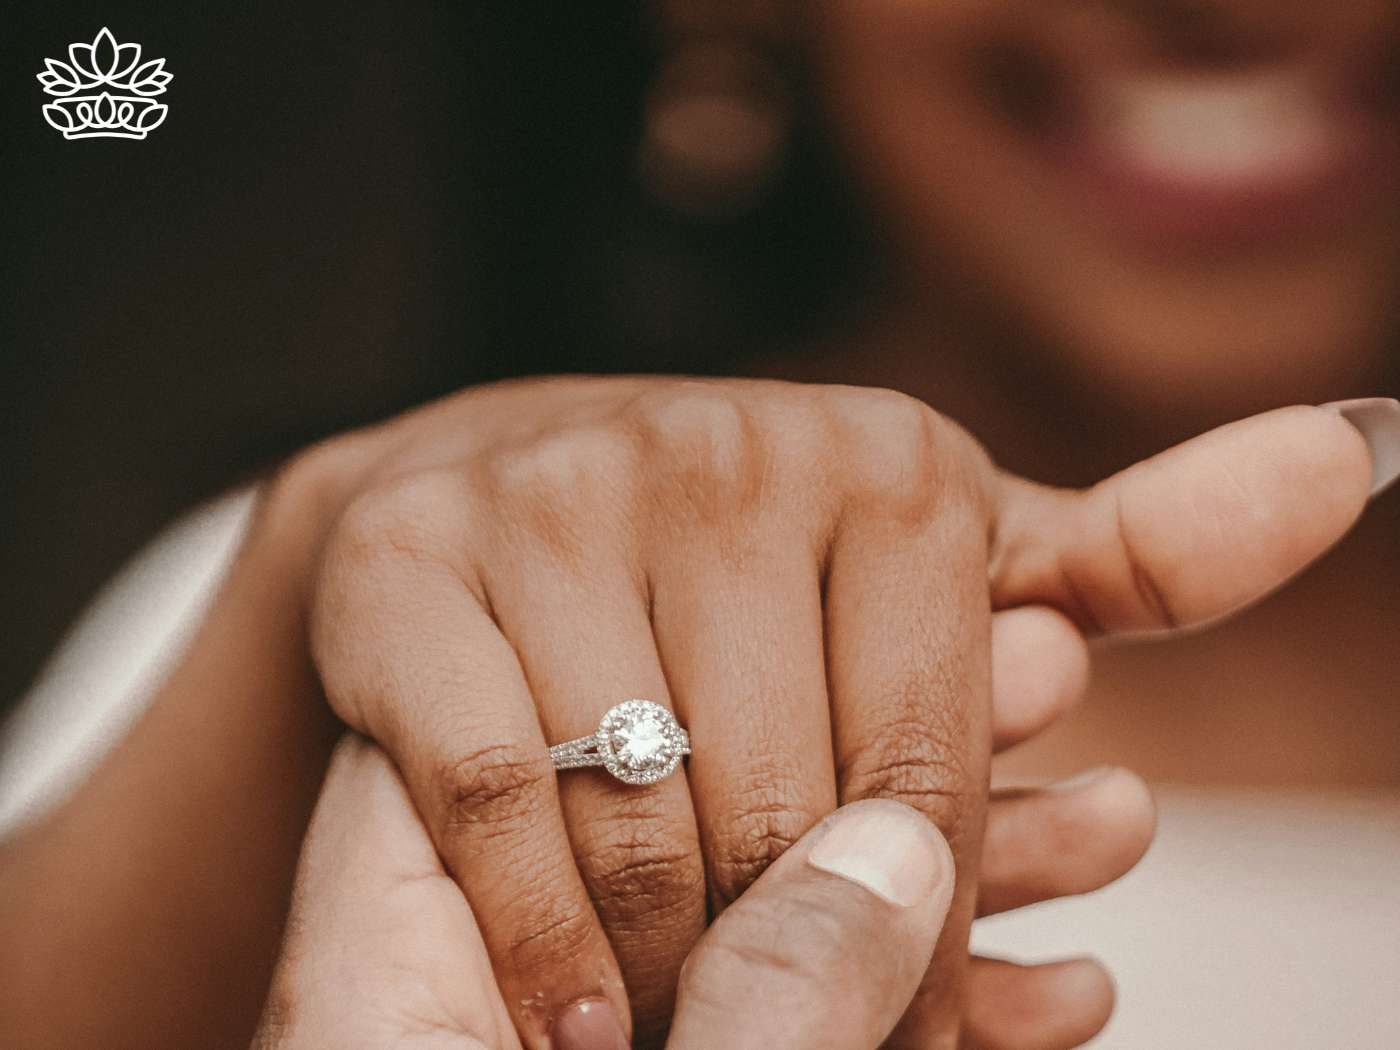 Close-up of an elegant engagement ring being placed on a finger, symbolizing a promise of love. This intimate moment reflects one of the best engagement gift ideas for foodie couples, a treasure among the engagement gifts from the Fabulous Flowers and Gifts Engagement Collection.